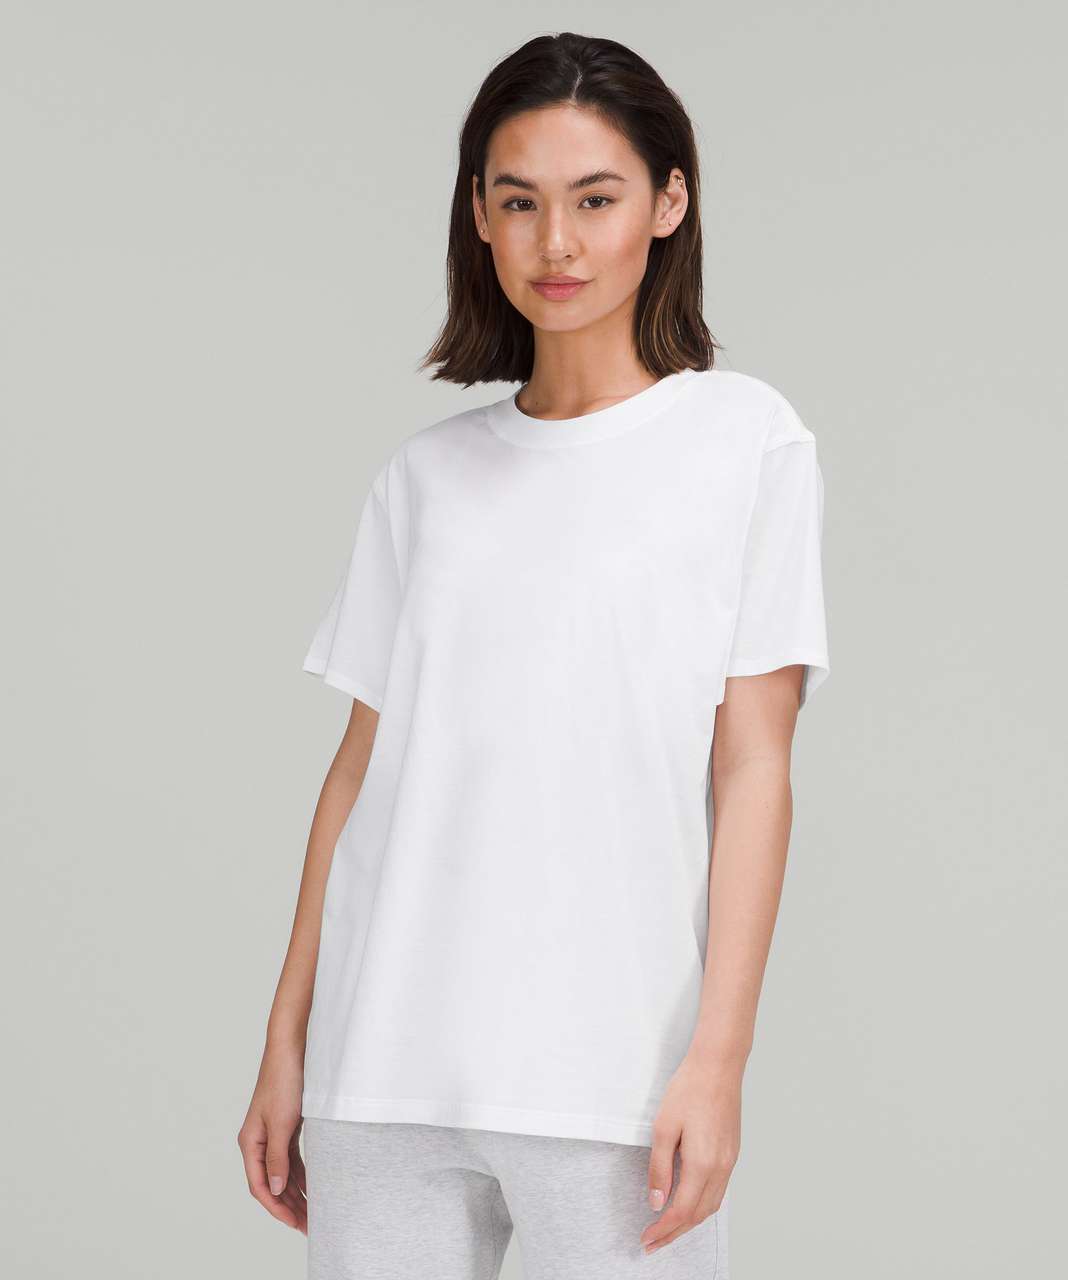 Lululemon All Yours Cotton T-Shirt - White